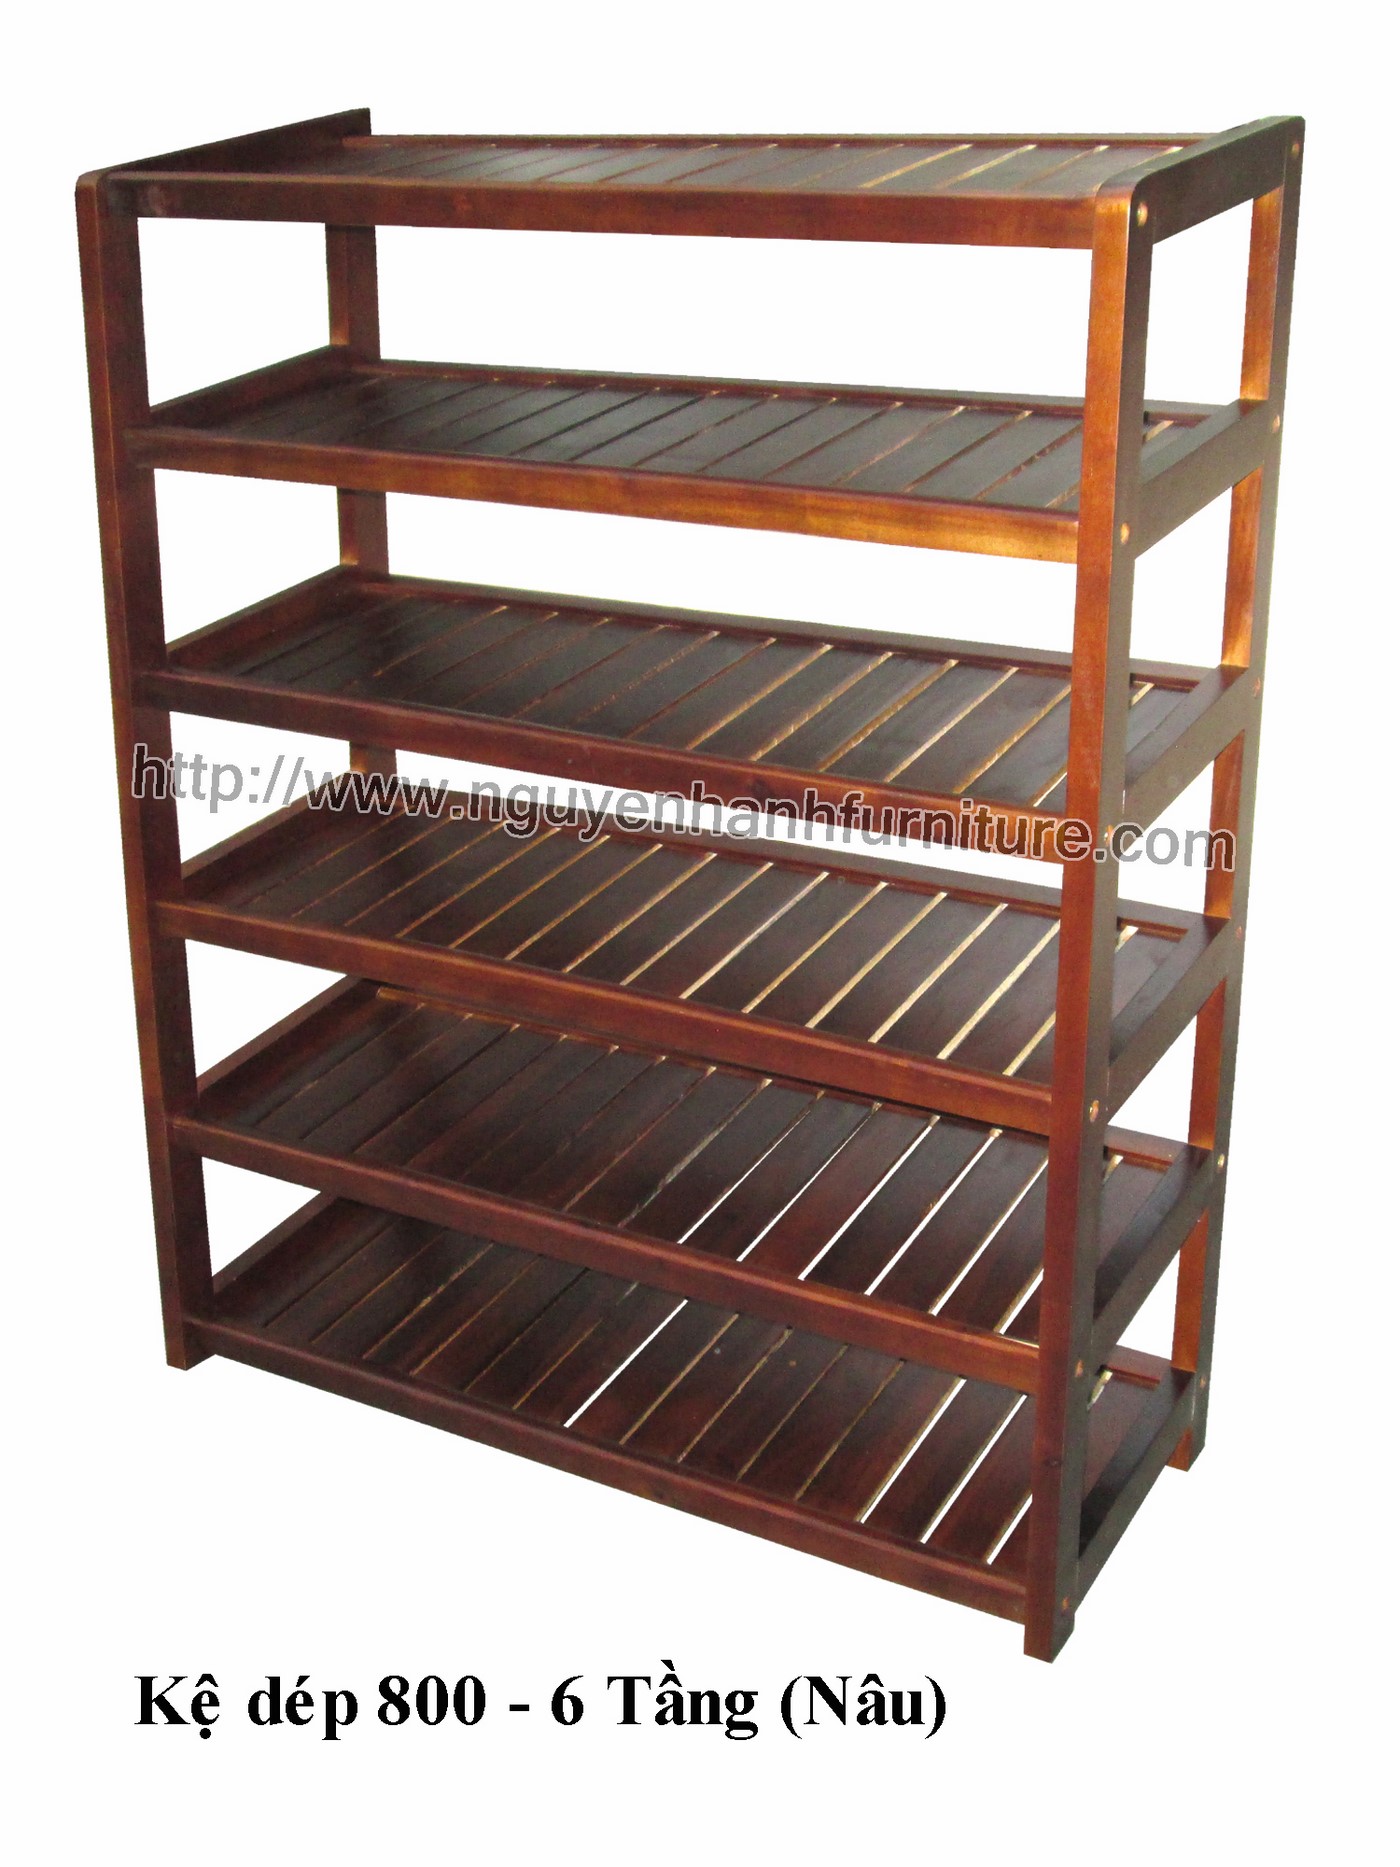 Name product: Shoeshelf 6 Floors 80 with sparse blades (Brown) - Dimensions: 80 x 30 x 98 (H) - Description: Wood natural rubber